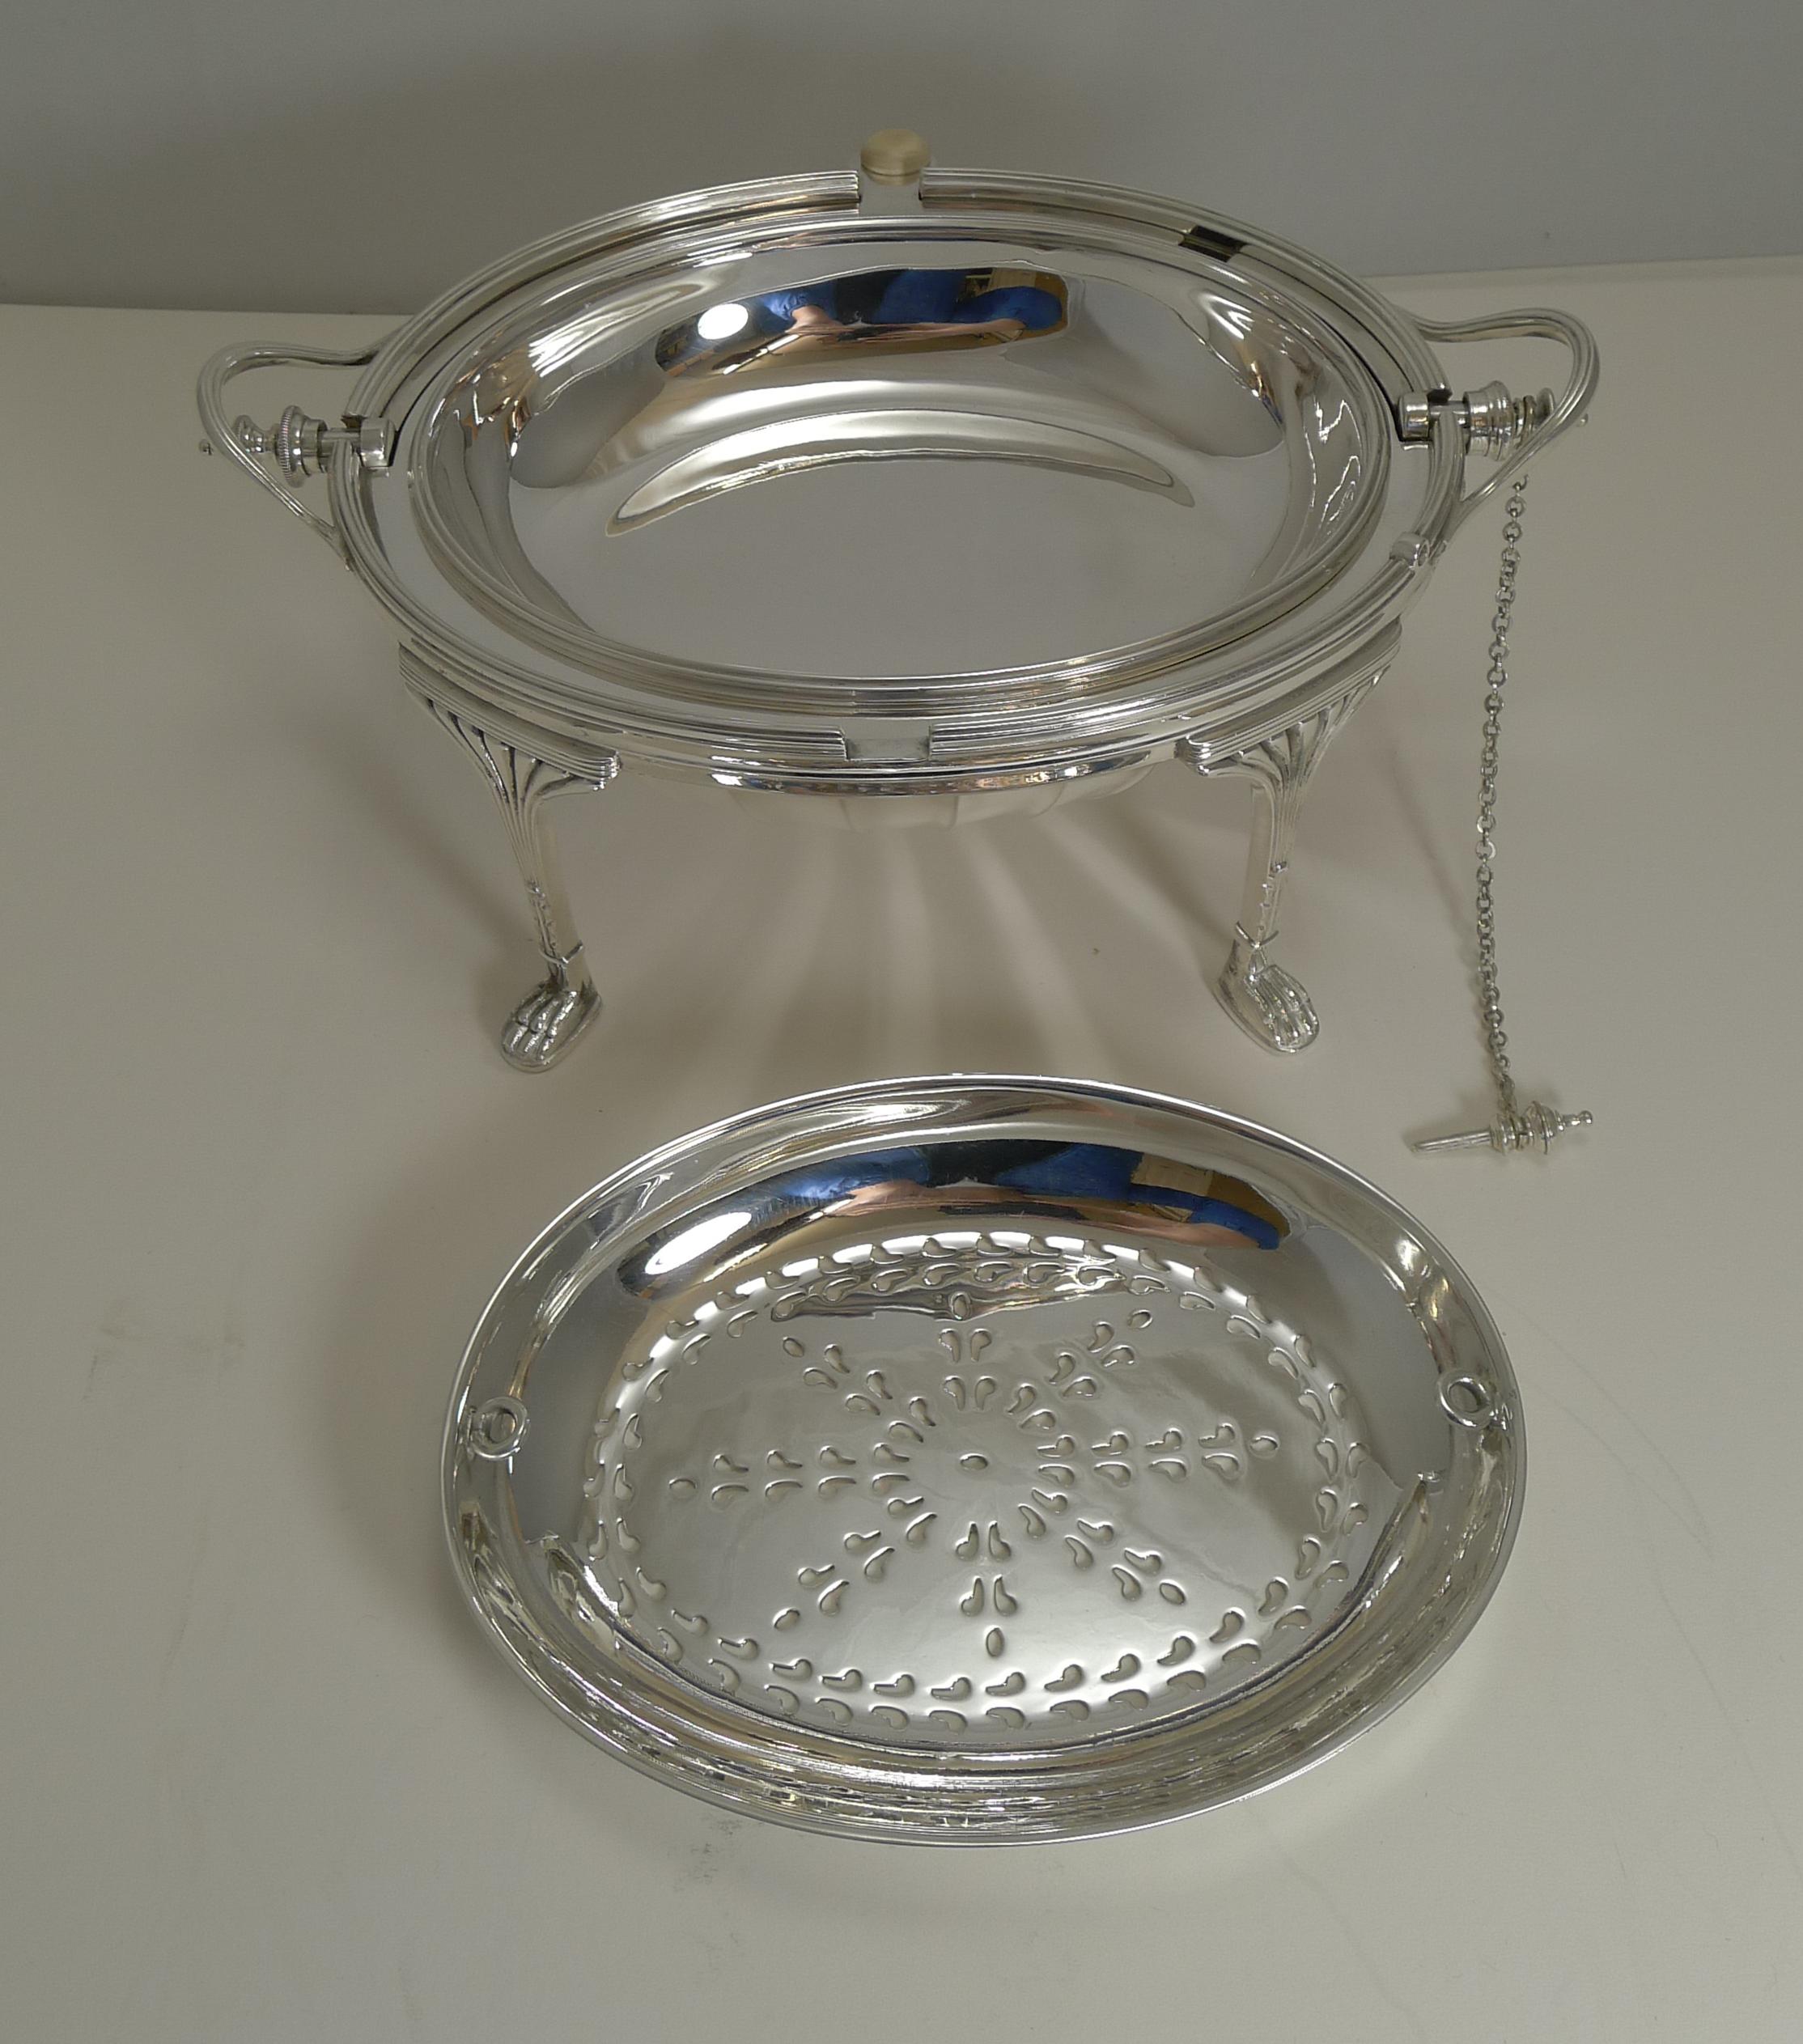 Antique English Silver Plated Revolving Breakfast / Serving Dish, Mappin & Webb 5